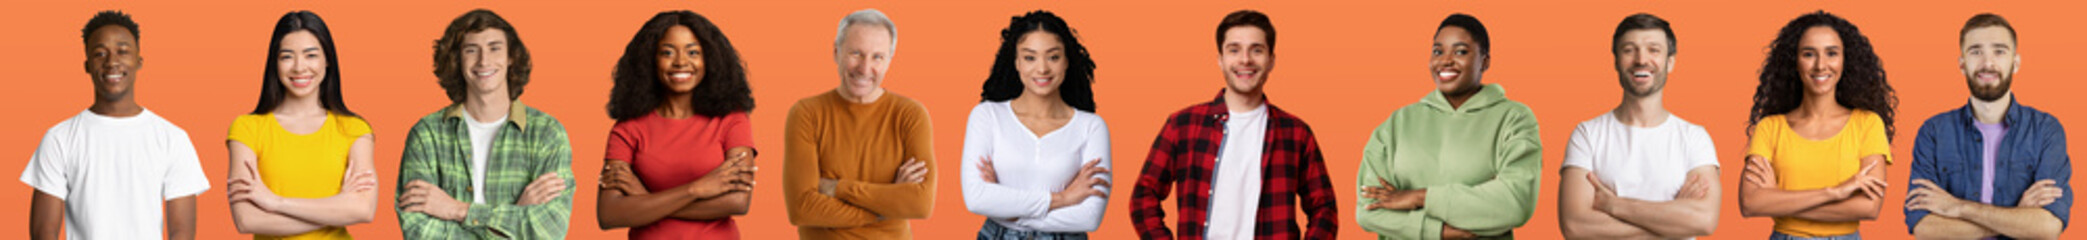 Collection of happy multiracial people posing on orange background